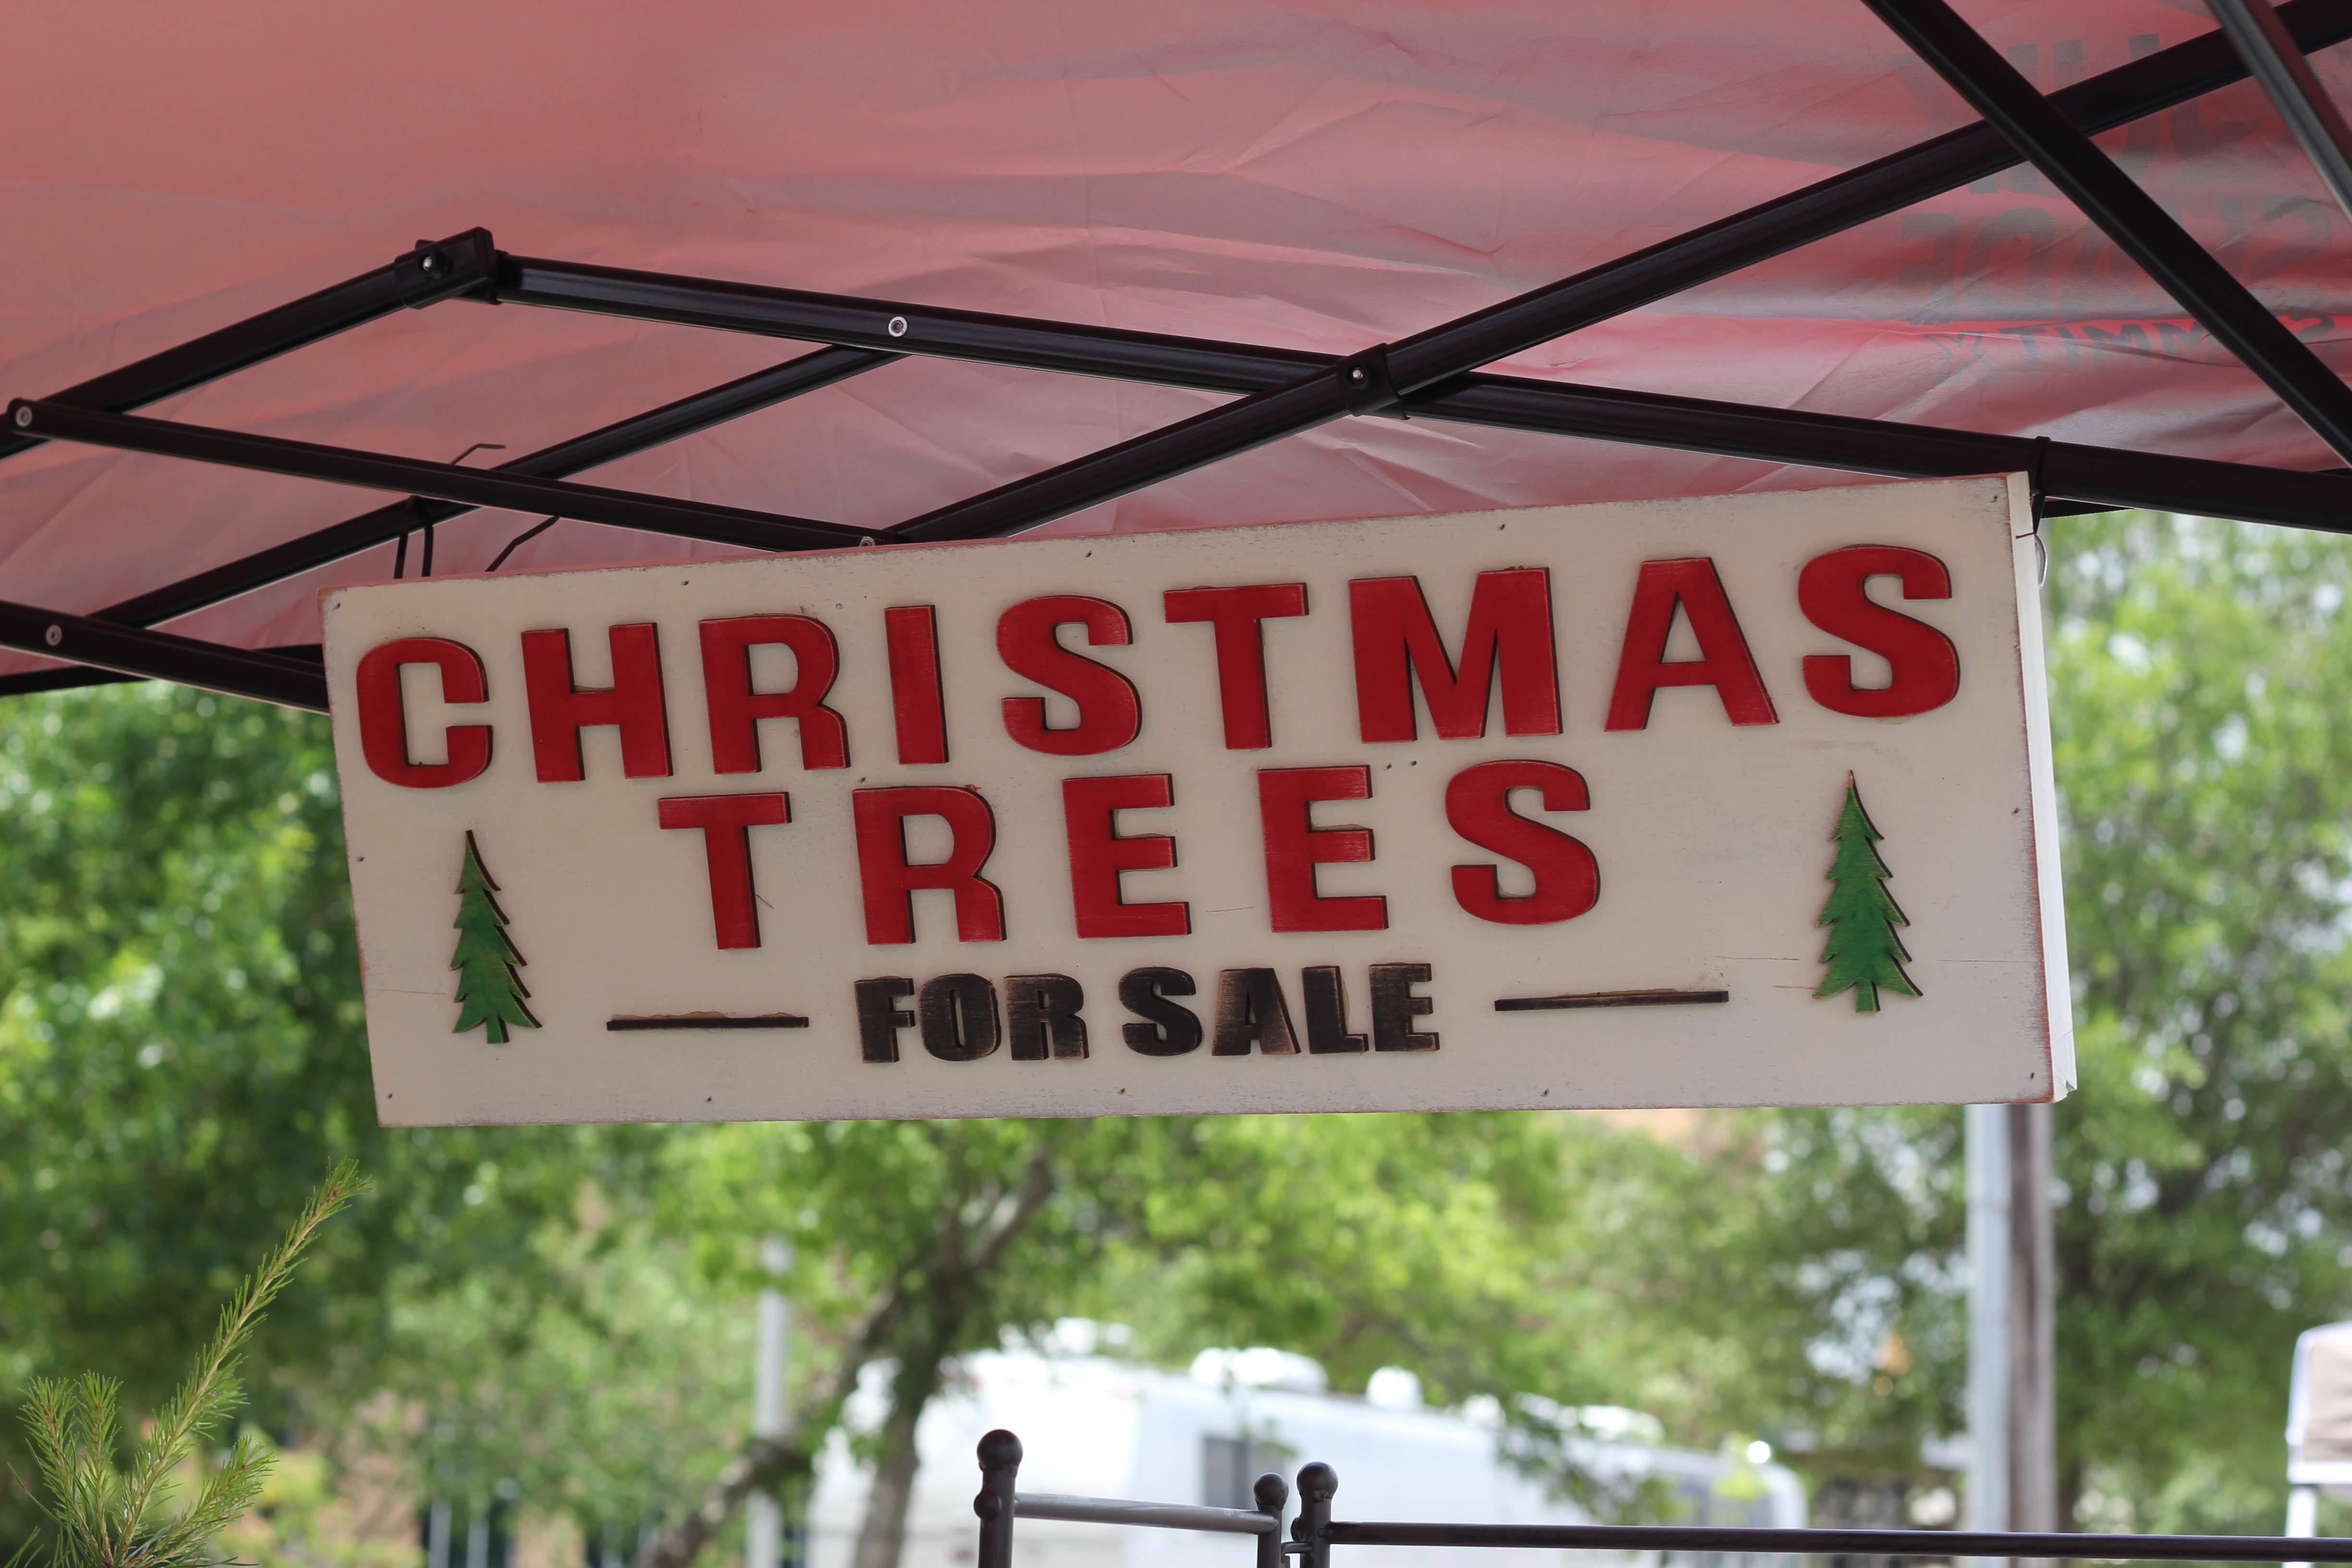 The 2018 Christmas tree shortage & what Brungot Farms is doing about it.